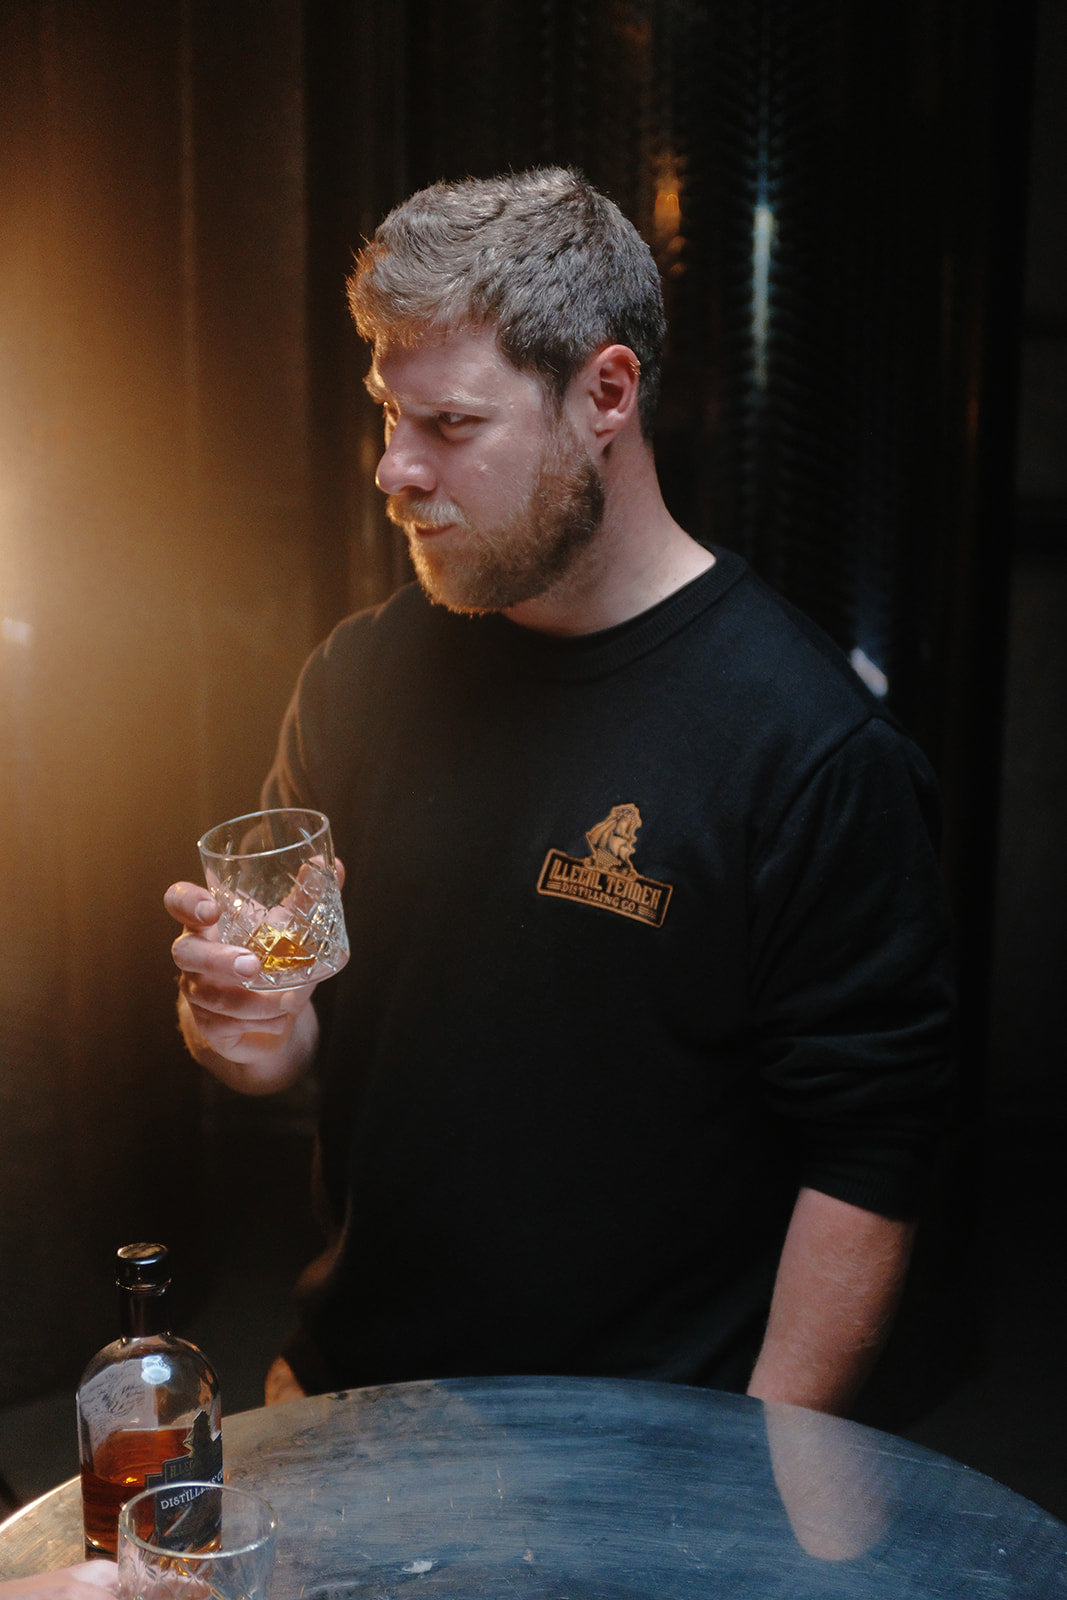 Left side view of a man holding a rum glass wearing a black Illegal Tender Rum Co sweatshirt.